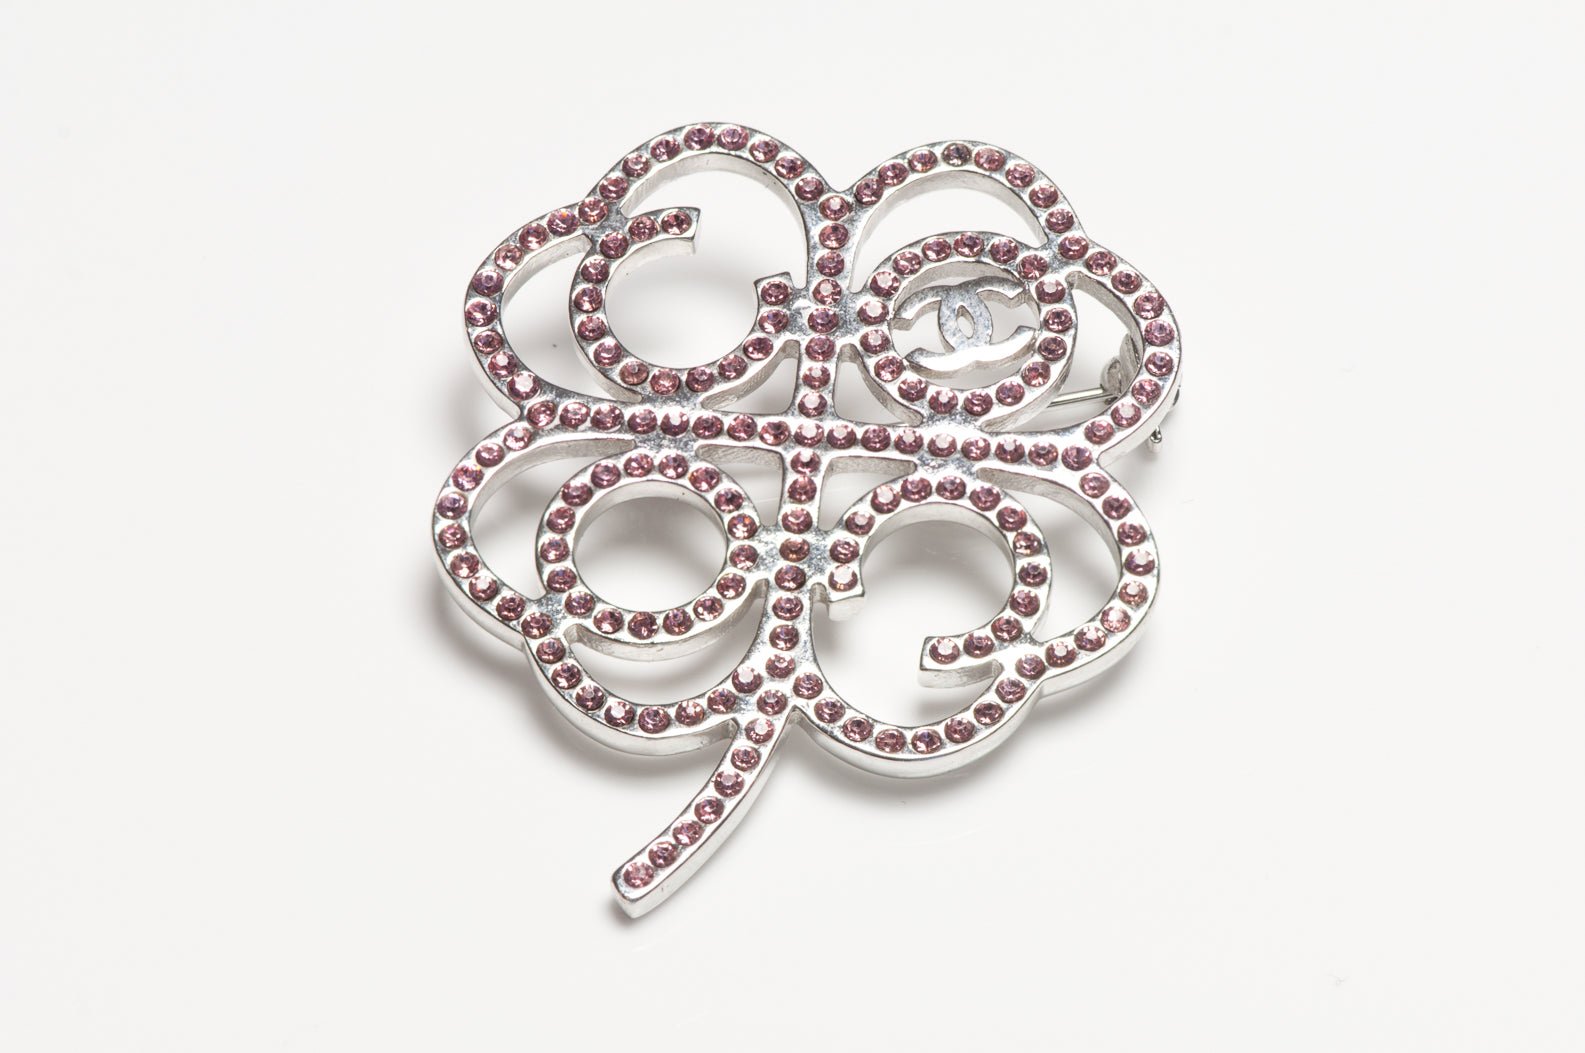 Chanel Paris Spring 2017 Pink Crystal Coco Clover Brooch - DSF Antique Jewelry